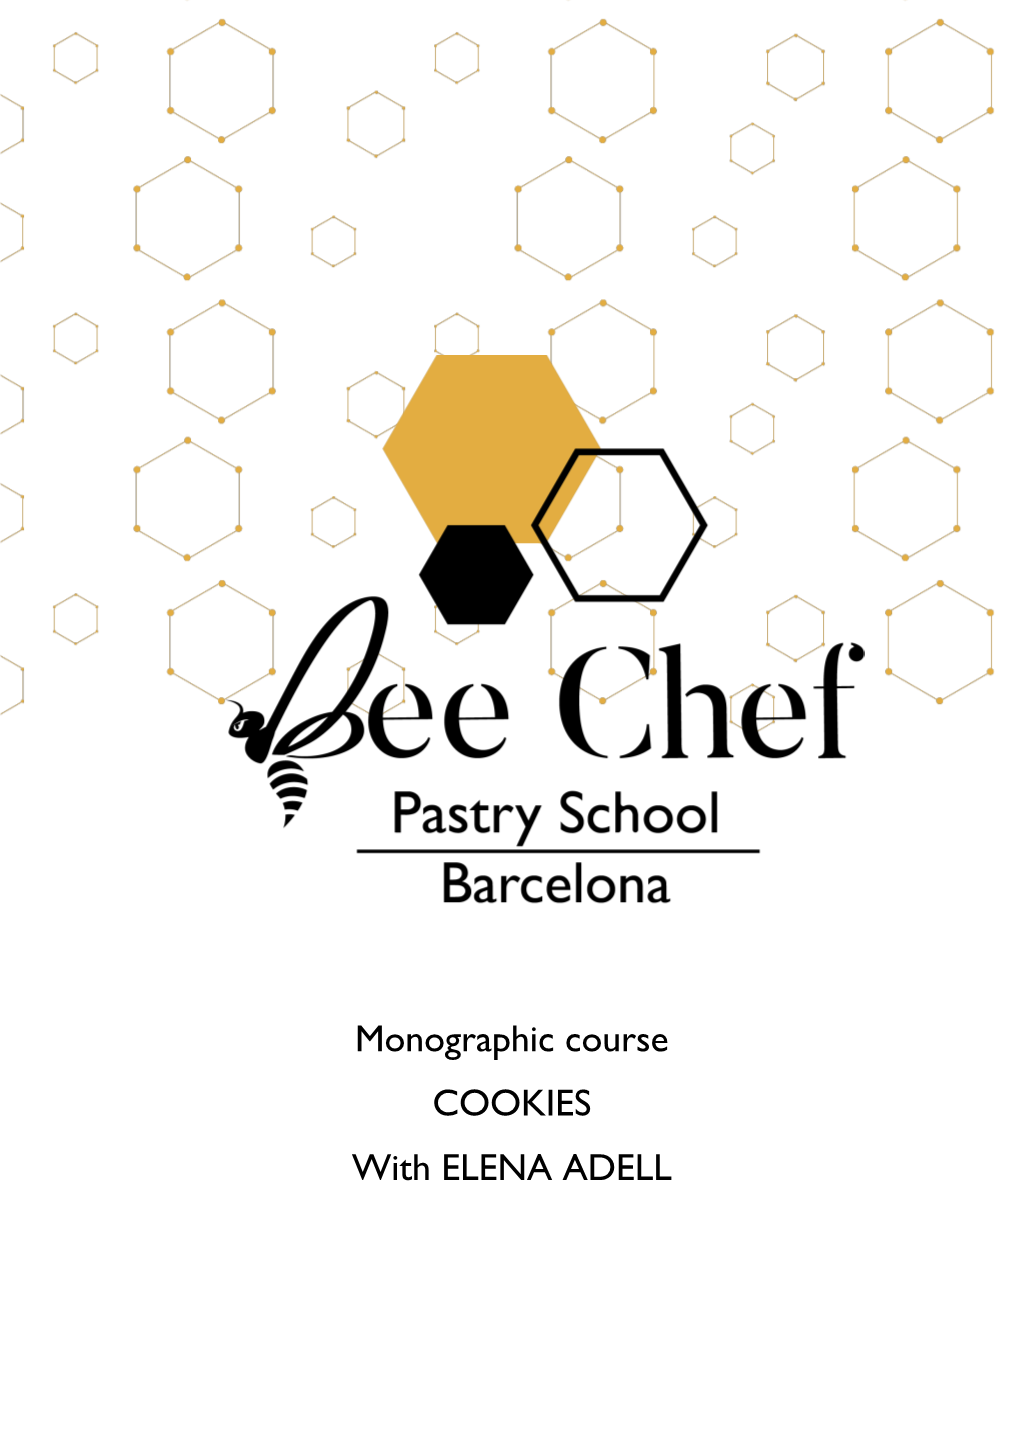 Monographic Course COOKIES with ELENA ADELL